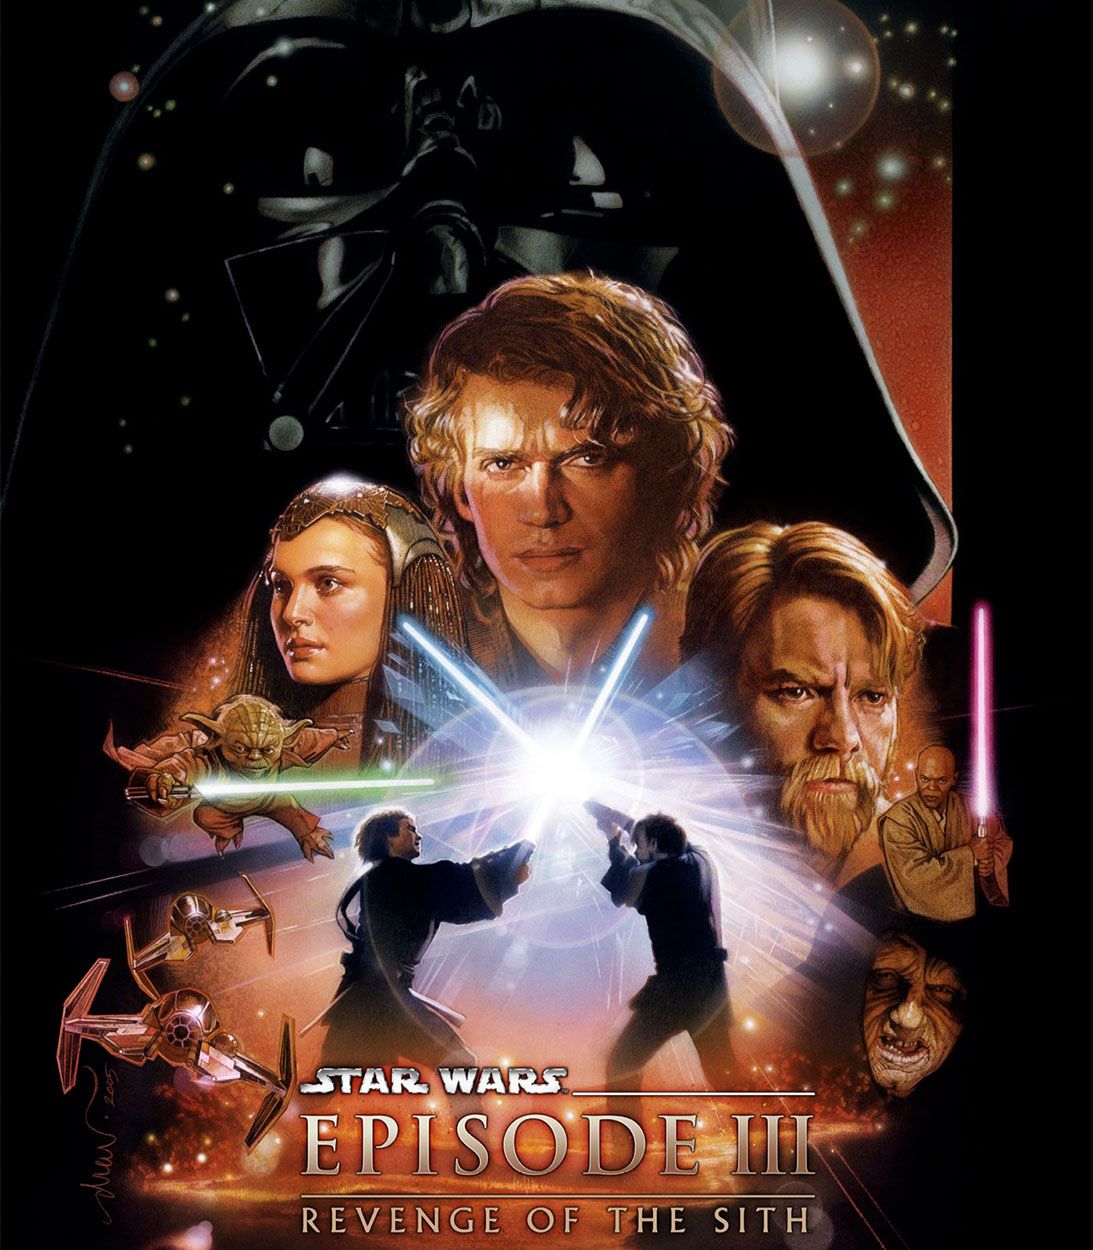 Star Wars Revenge of the Sith vertical